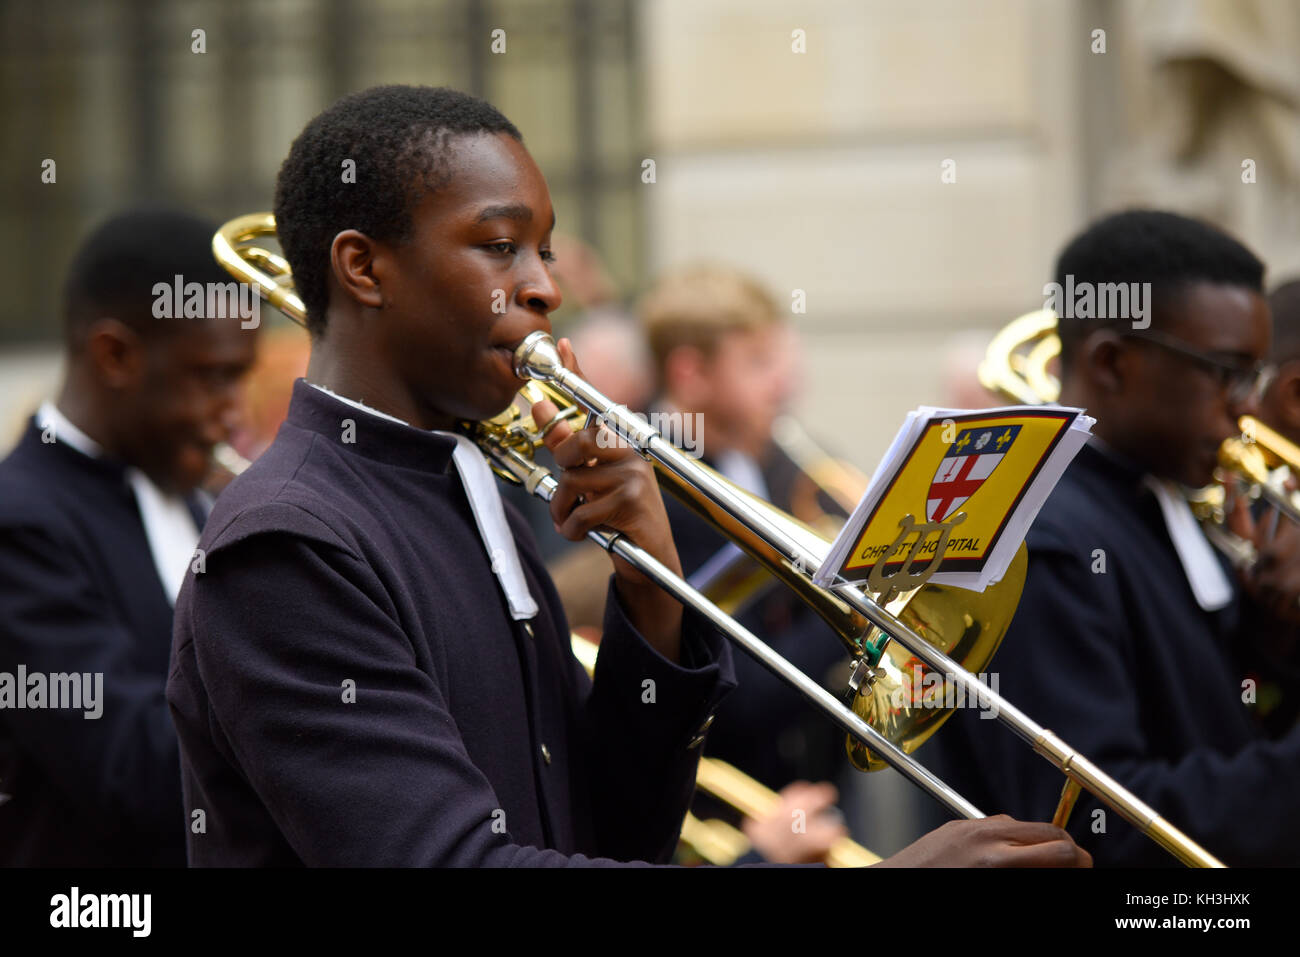 Christs Hospital School Band al Lord Mayor's Show Procession Parade lungo Cheapside, Londra. In città Foto Stock